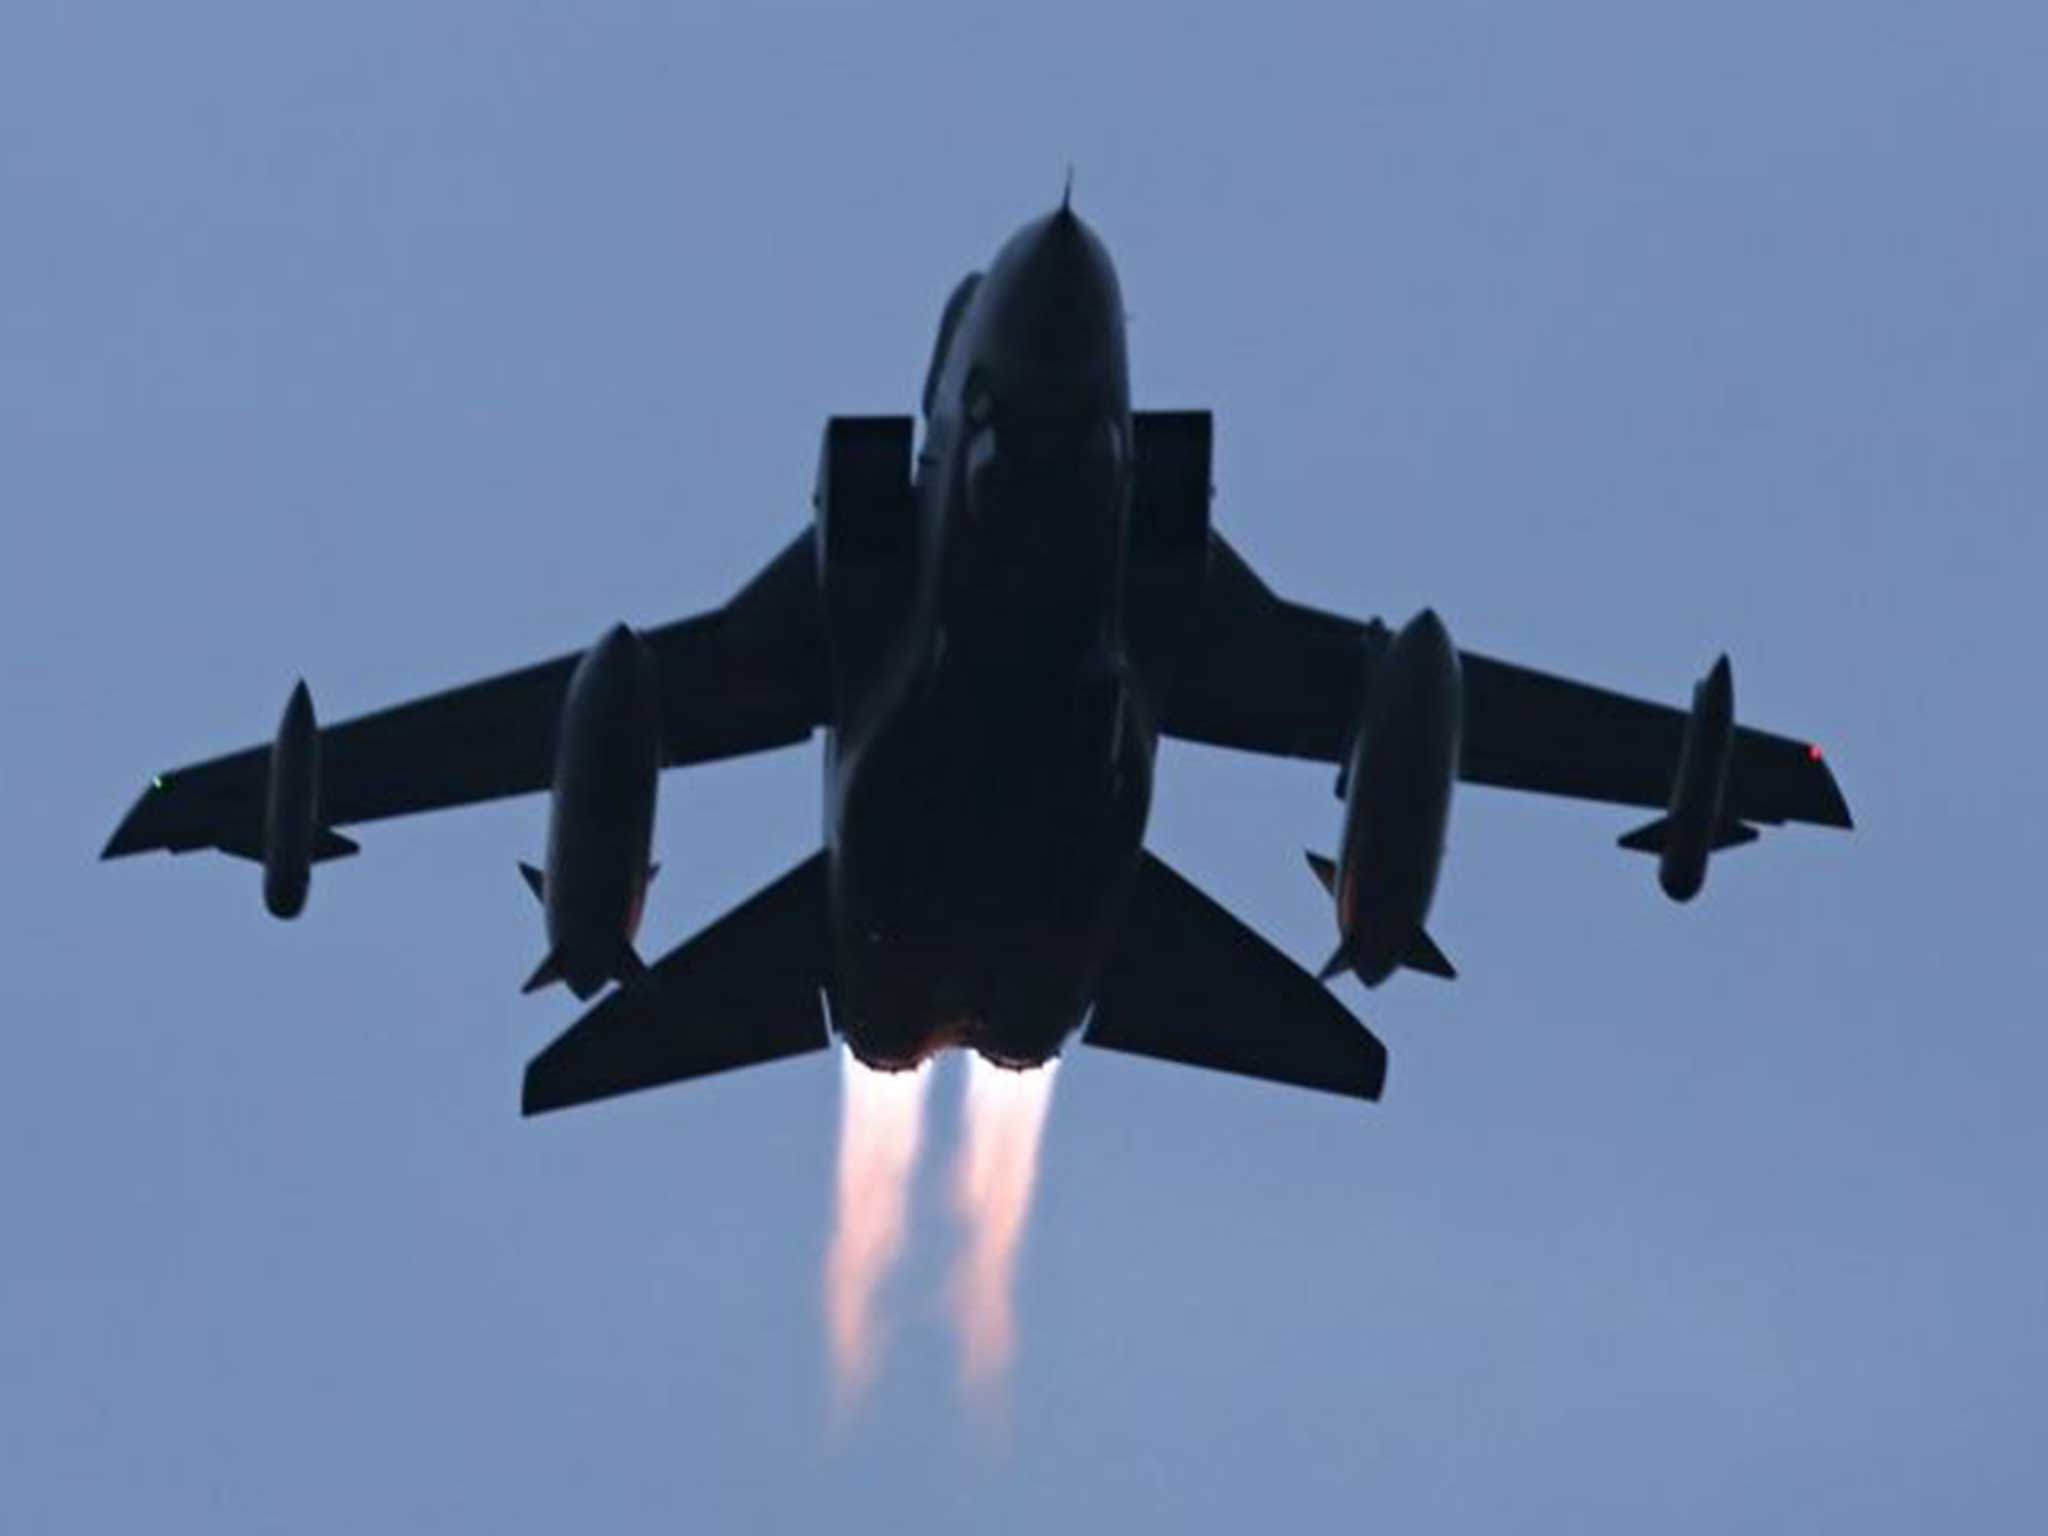 An RAF Tornado jet takes off from Scotland, the planes have been used to bomb targets in Syria